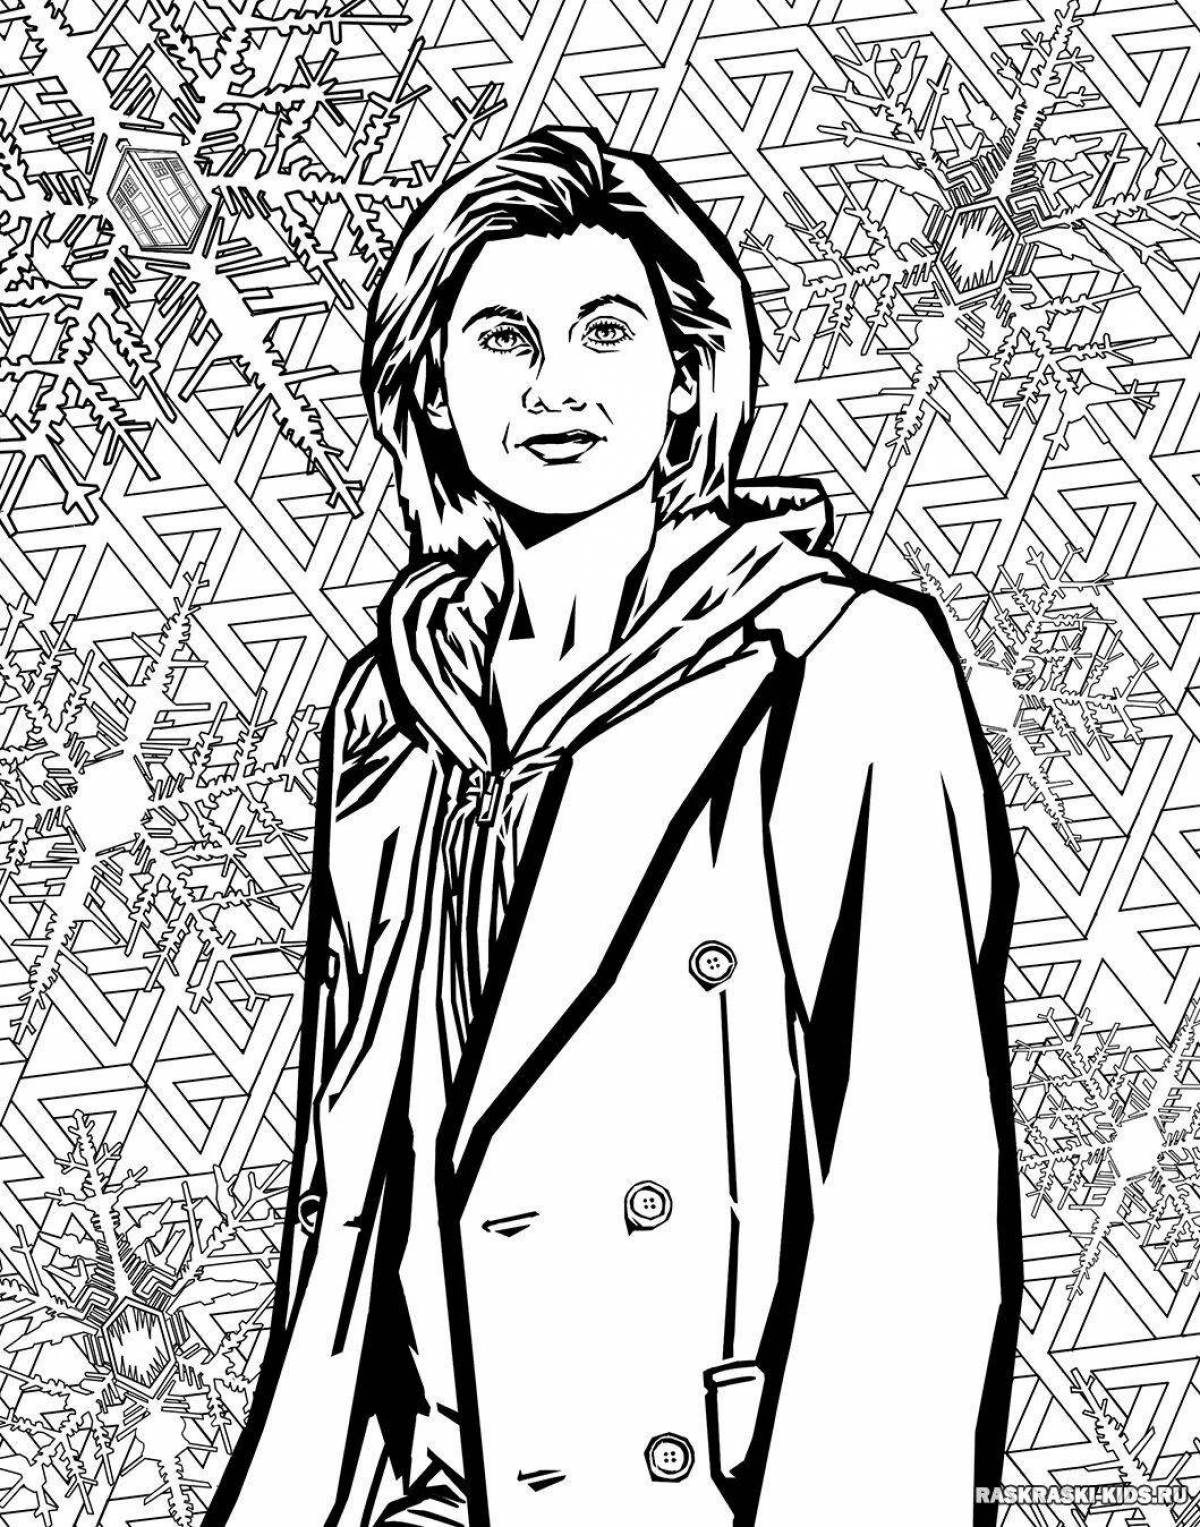 Living doctor who coloring book